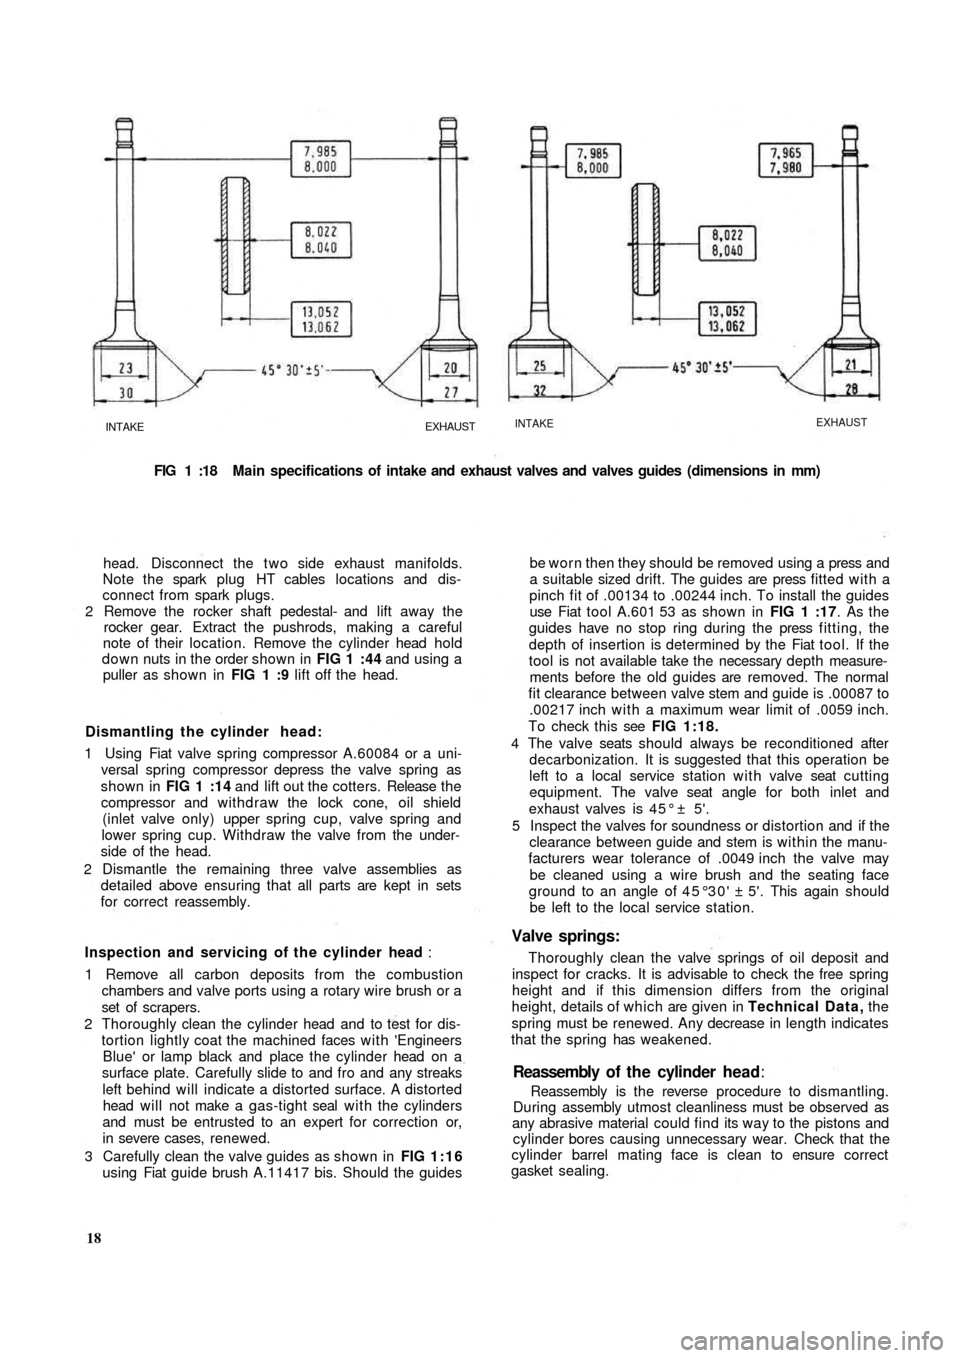 FIAT 500 1957 1.G Workshop Manual INTAKEEXHAUSTINTAKEEXHAUST
FIG 1 :18  Main specifications of intake and exhaust valves and valves guides (dimensions in  mm)
head. Disconnect the t w o side exhaust manifolds.
Note the spark  plug  HT